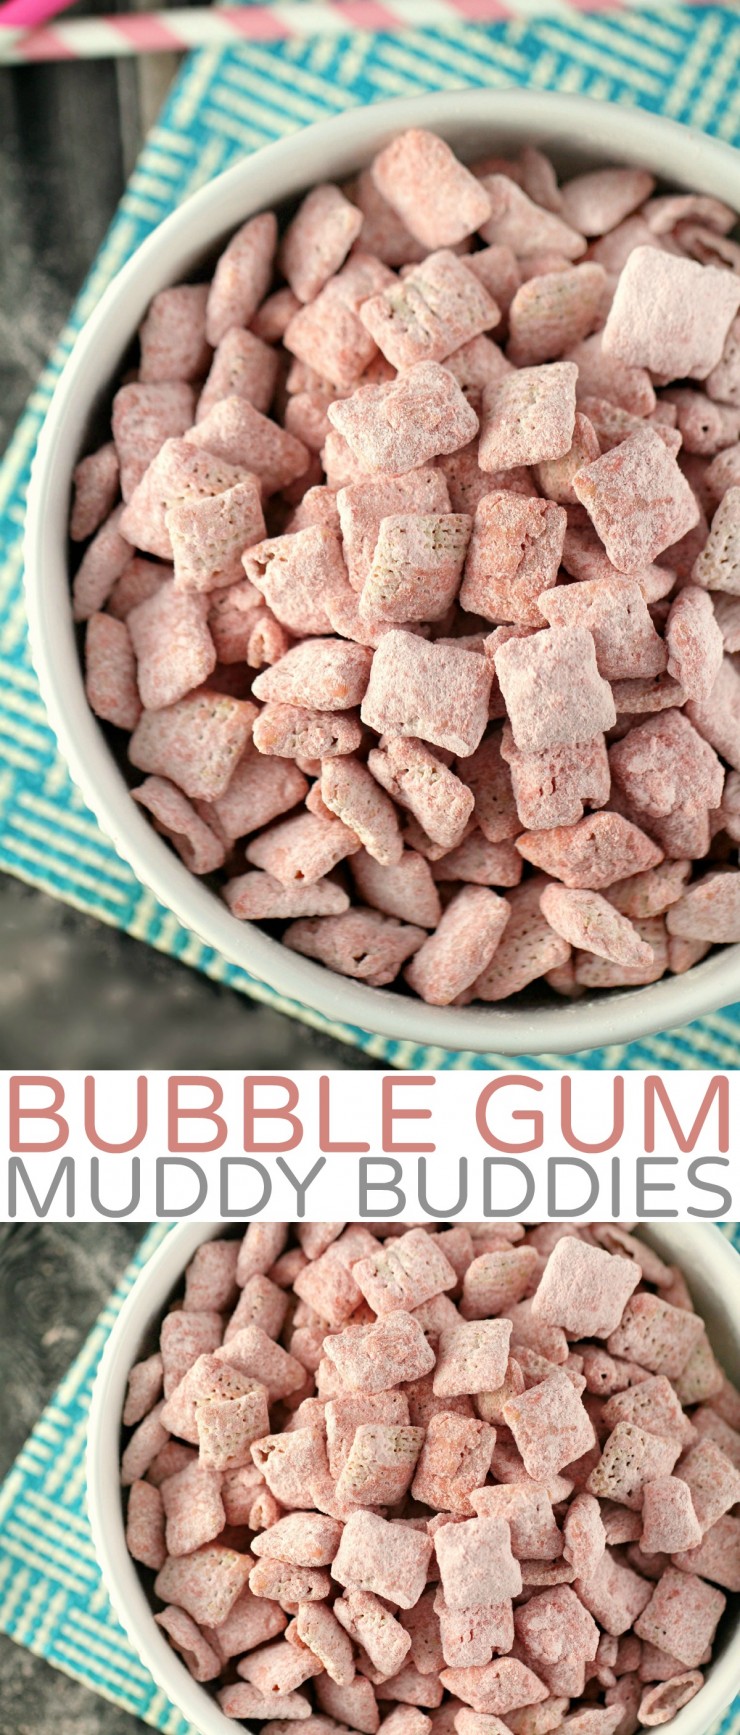 Bubble Gum Muddy Buddies - Life Love Liz www.lifeloveliz.com/ bubble-gum-muddy-buddies Bubble Gum Muddy Buddies are an addictive snack perfect for kids birthday parties or just for a little nostalgia!